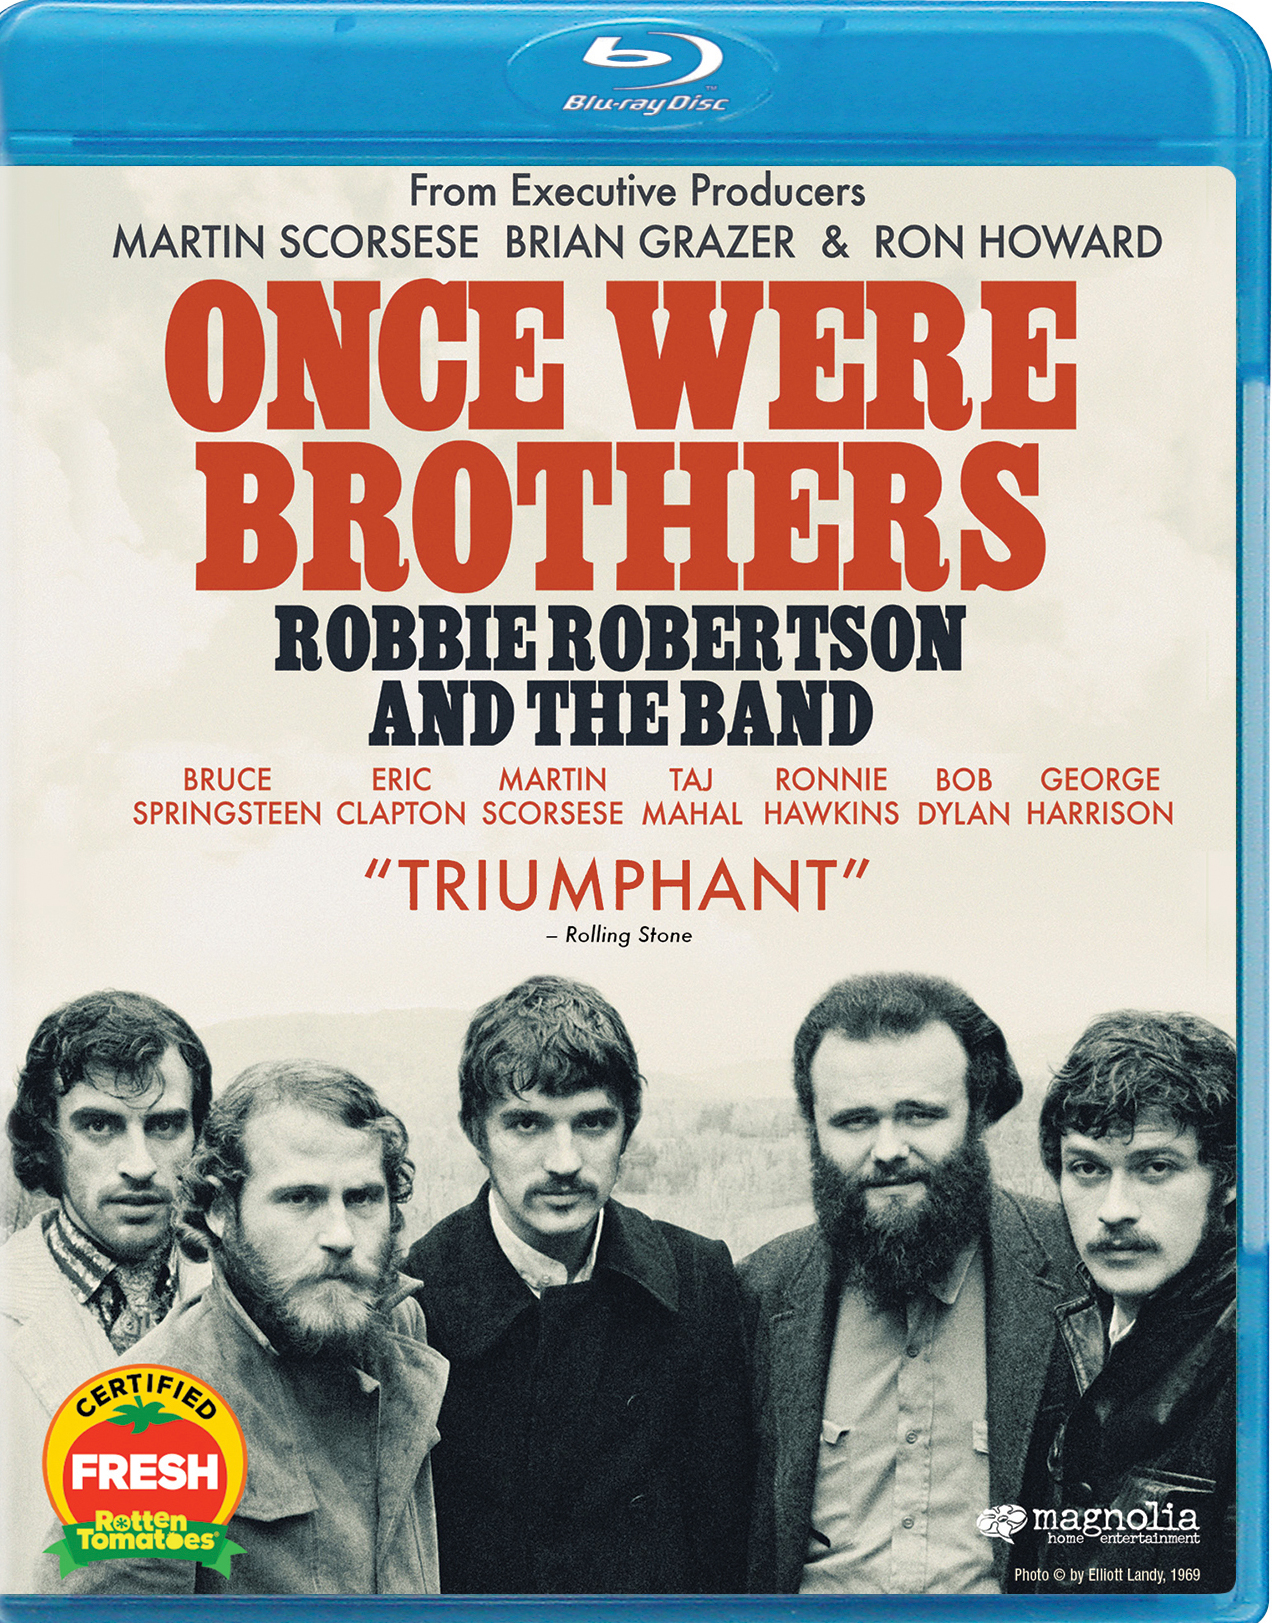 Once Were Brothers: Robbie Robertson and the Band [Blu-ray] [2020]